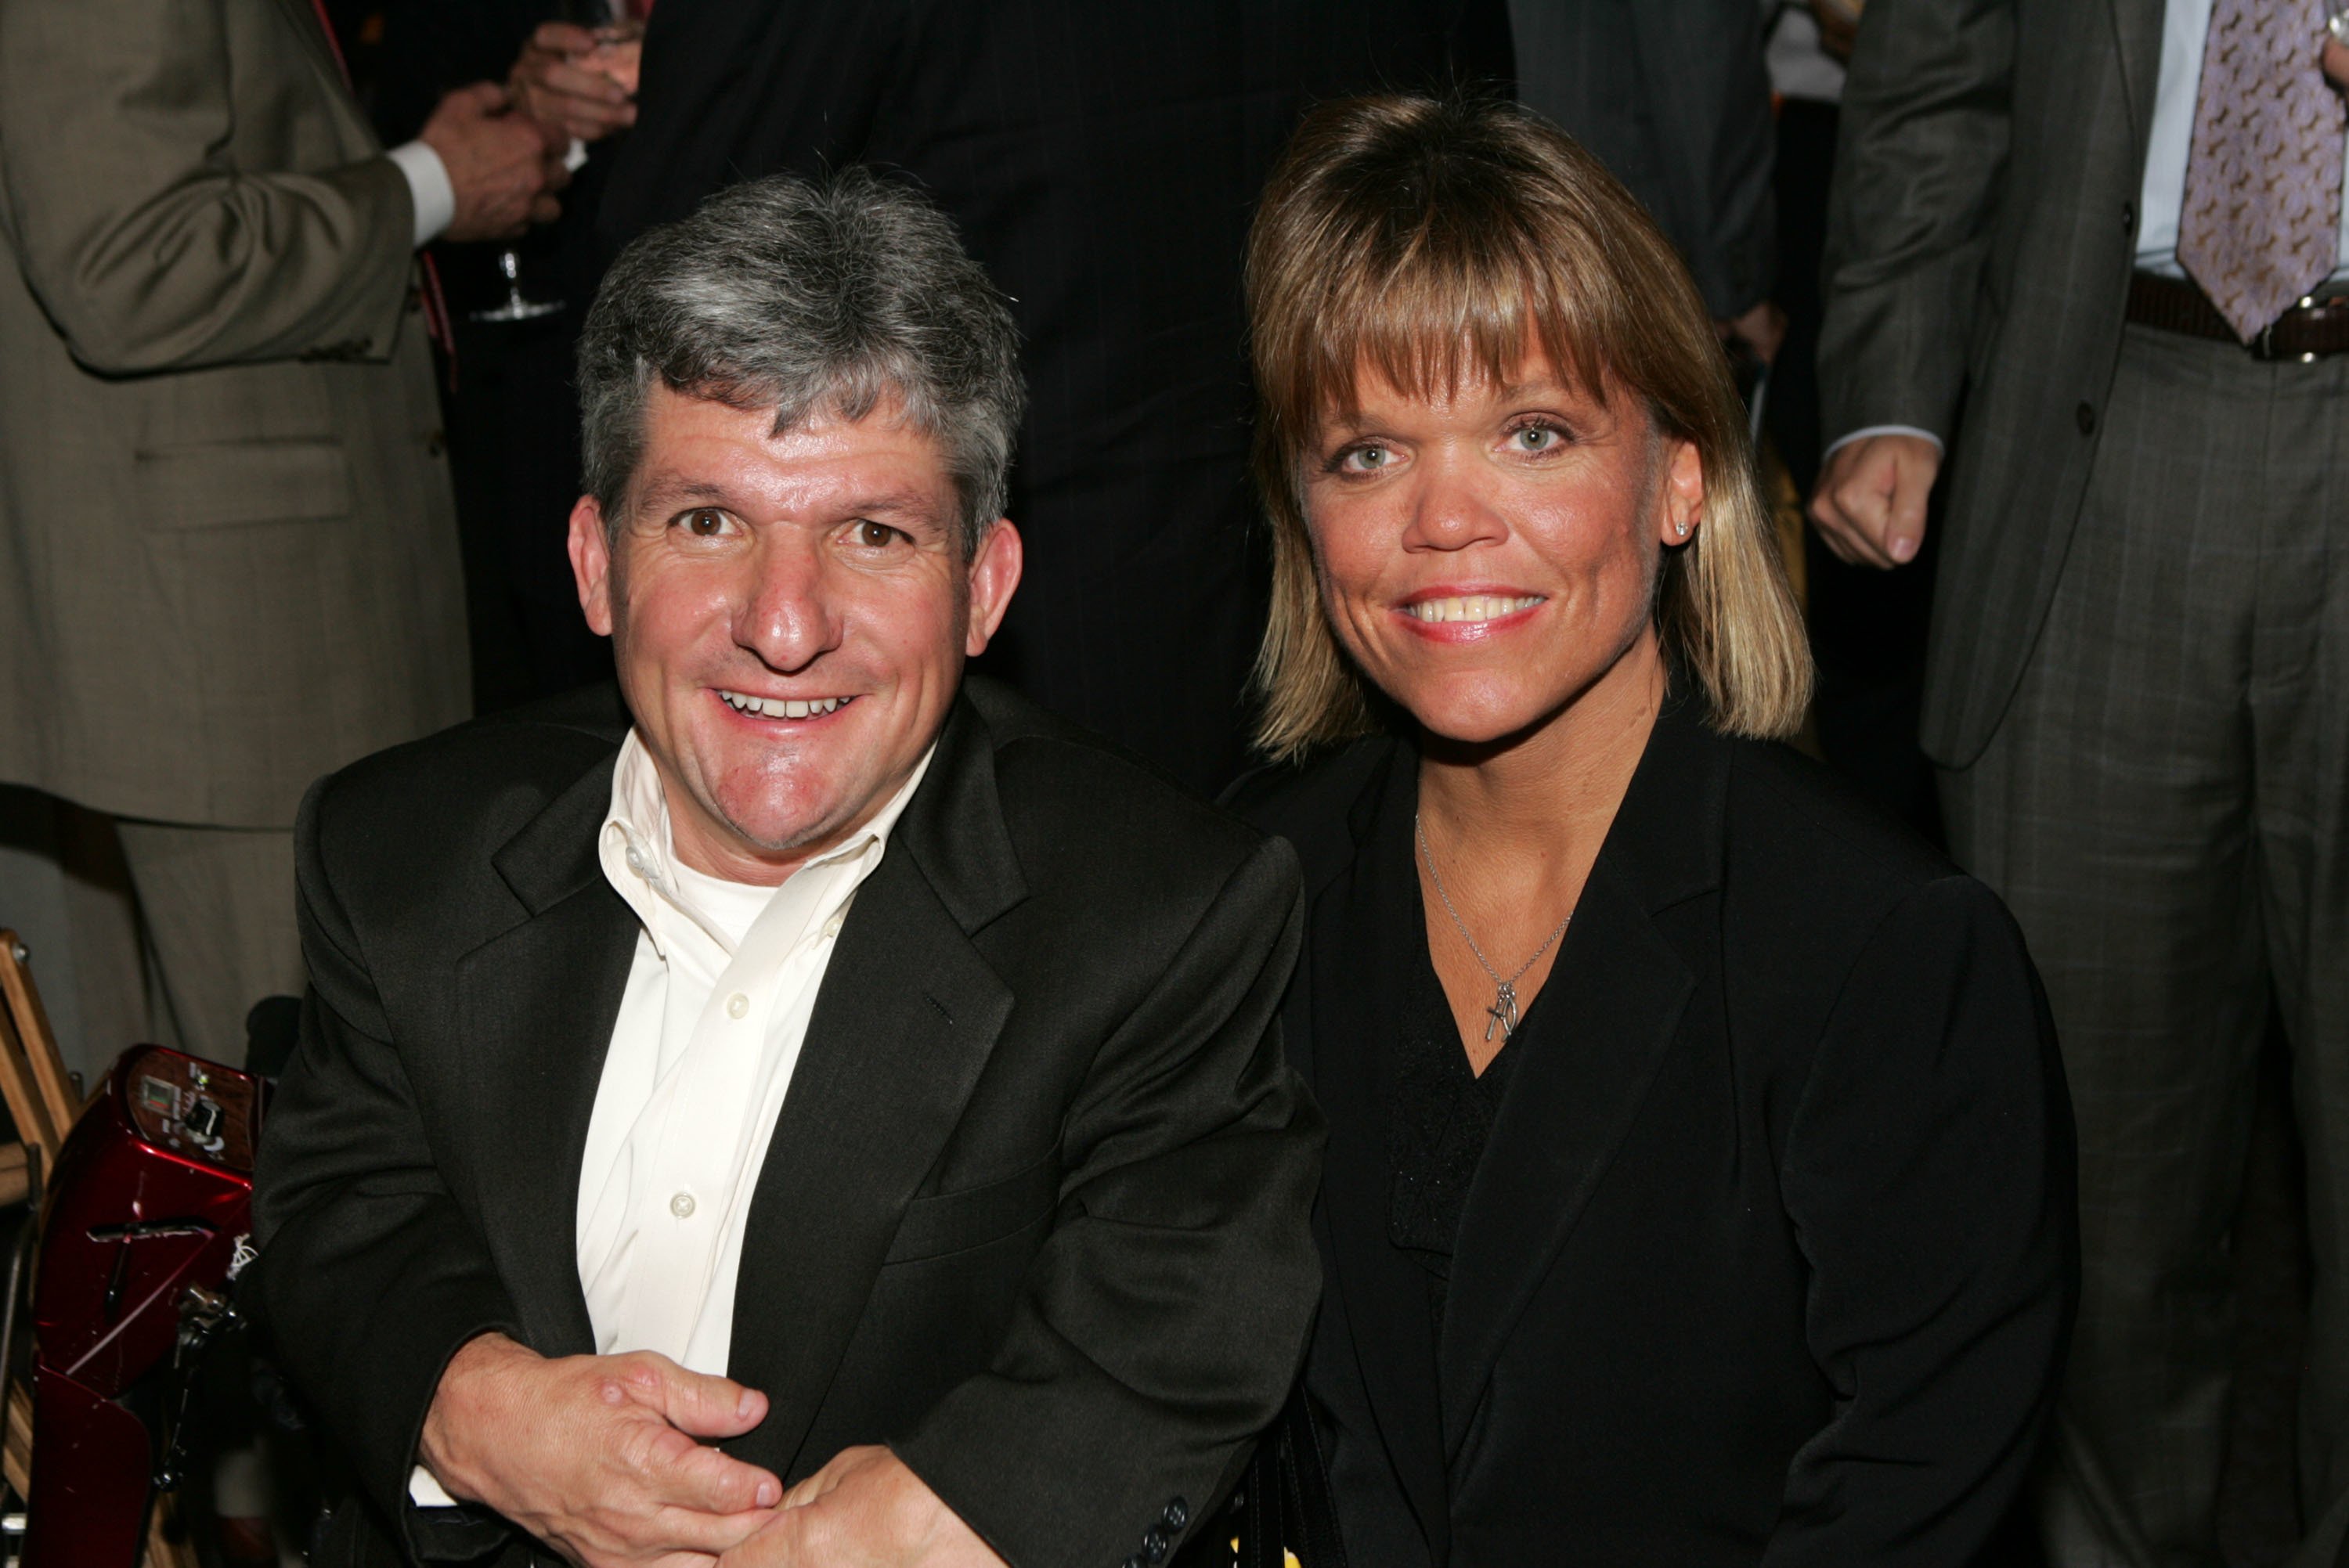 Television personalities Matt and Amy Roloff attend the Discovery Upfront Presentation NY - Talent Images | Getty Images